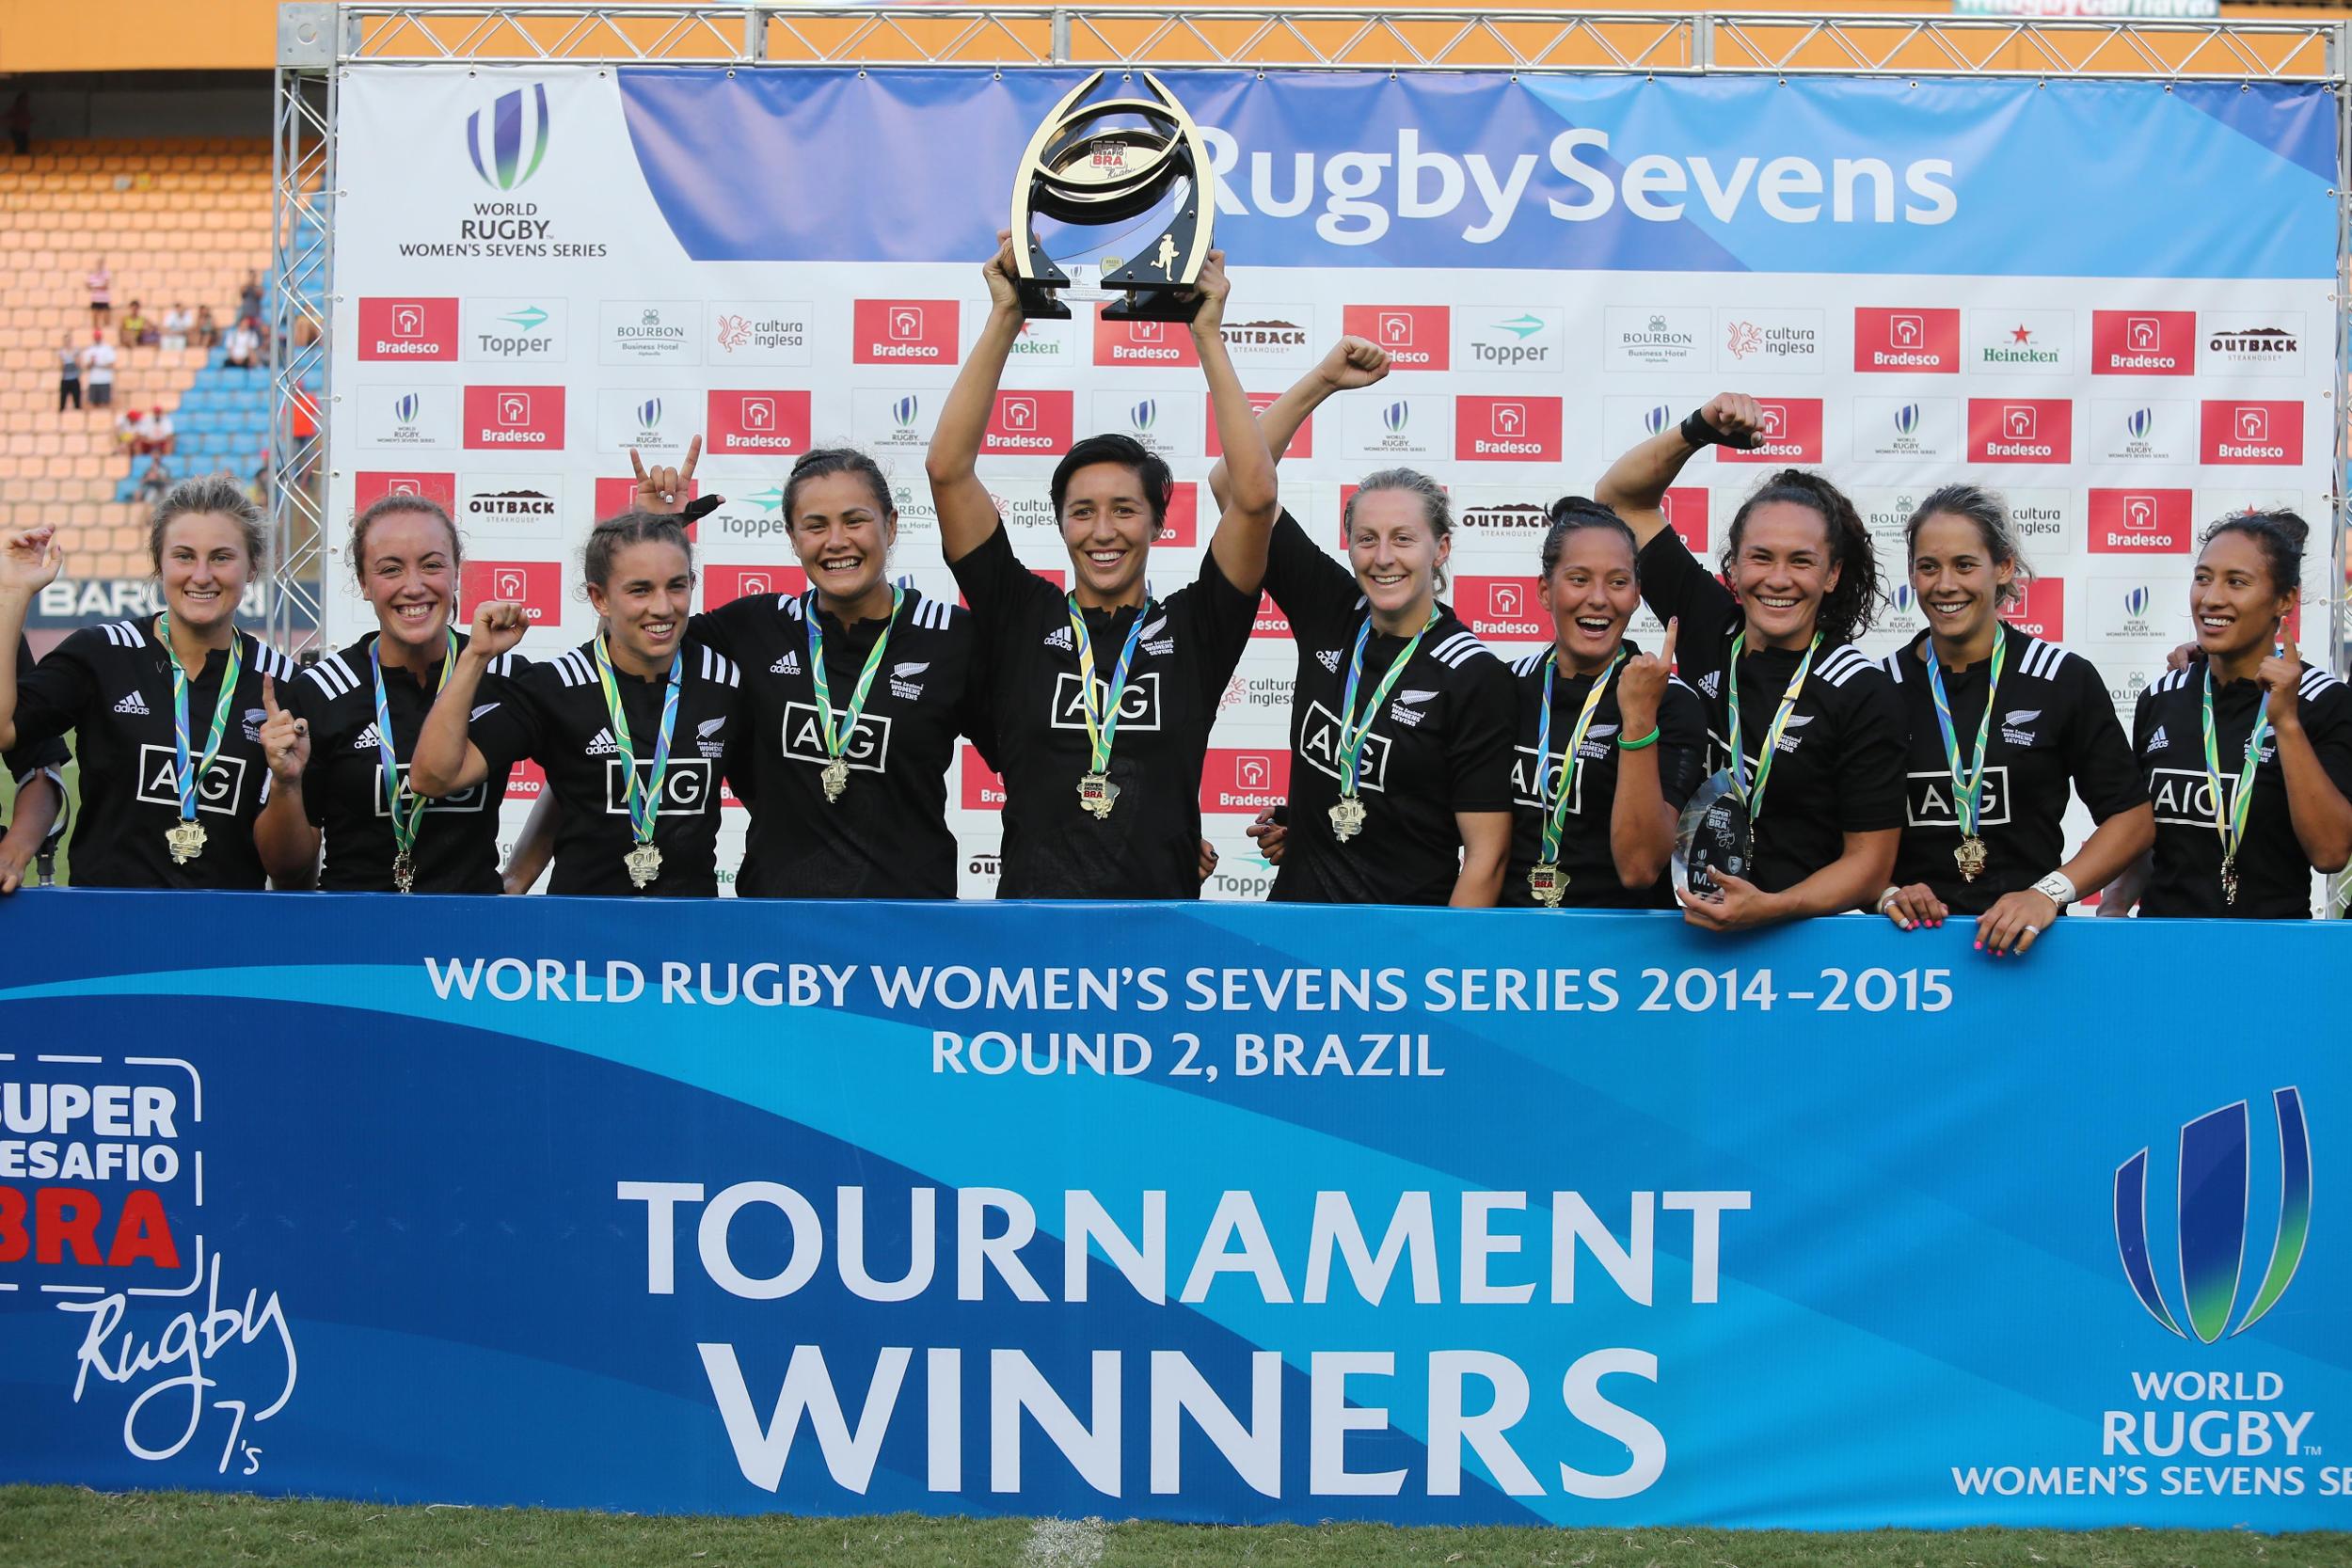 New Zealand lead the overall standings after victories in the opening legs of the series ©World Rugby